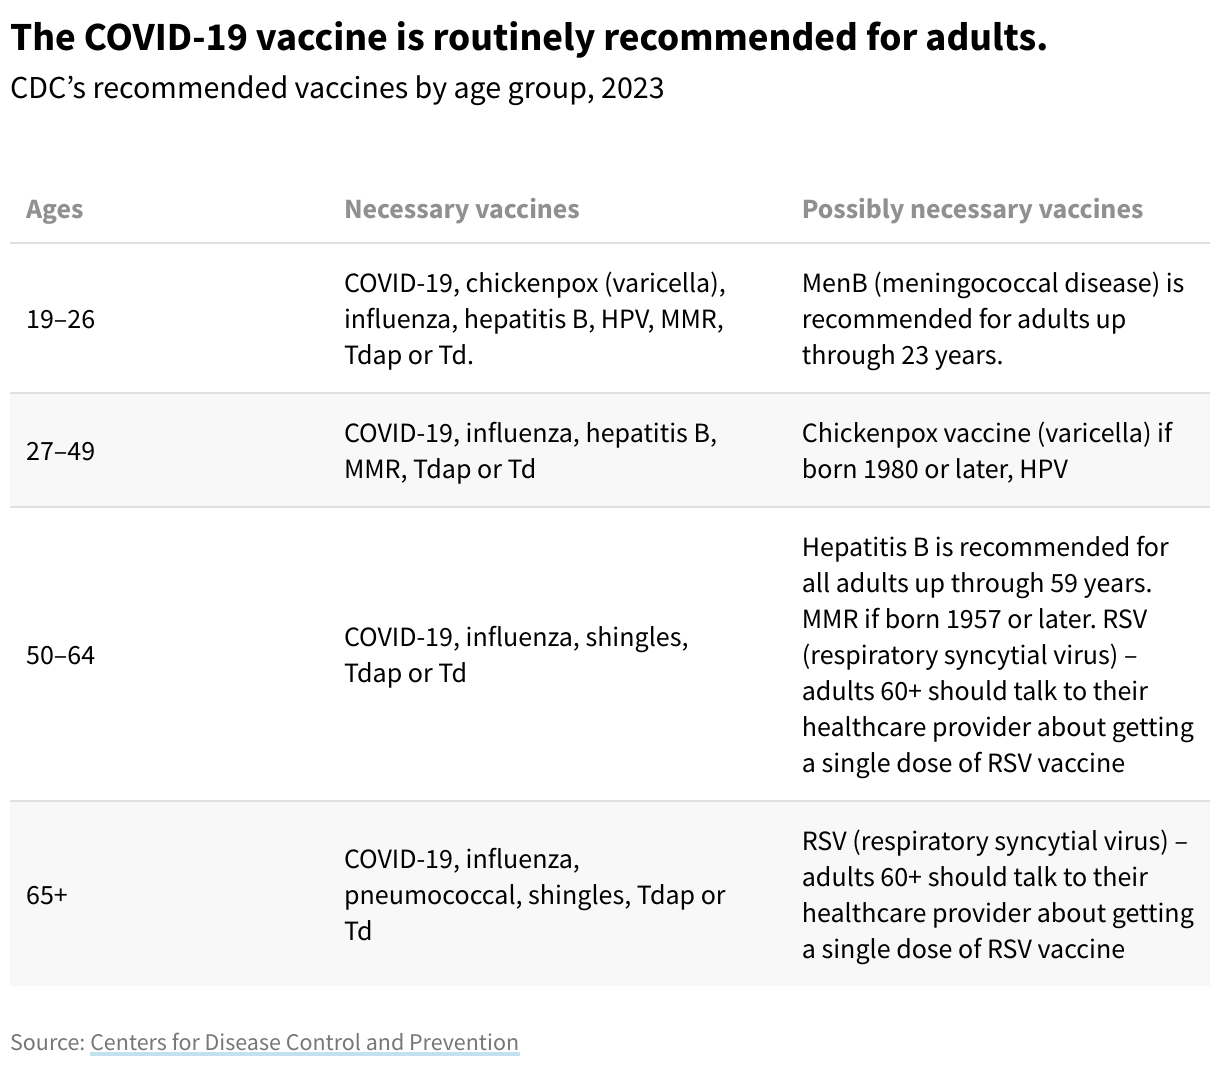 Table with the CDC's recommended vaccines by age group. Covid-19 ir now a recommended vaccine for adults. 